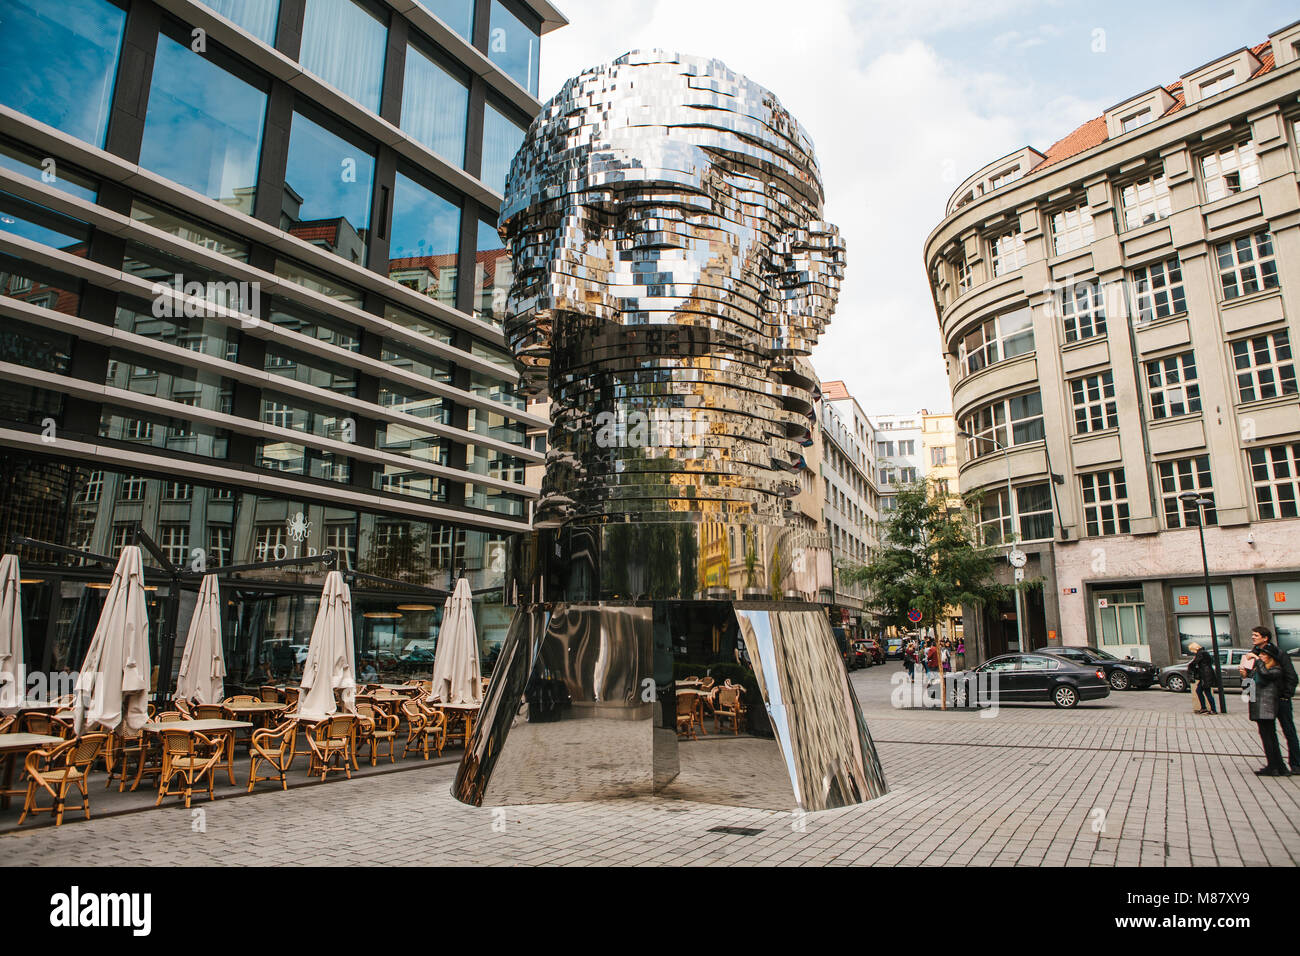 Prague, September 25, 2017: The sculpture of Franz Kafka stands near the shopping center called Quadrio above the metro station, which is called Narod Stock Photo